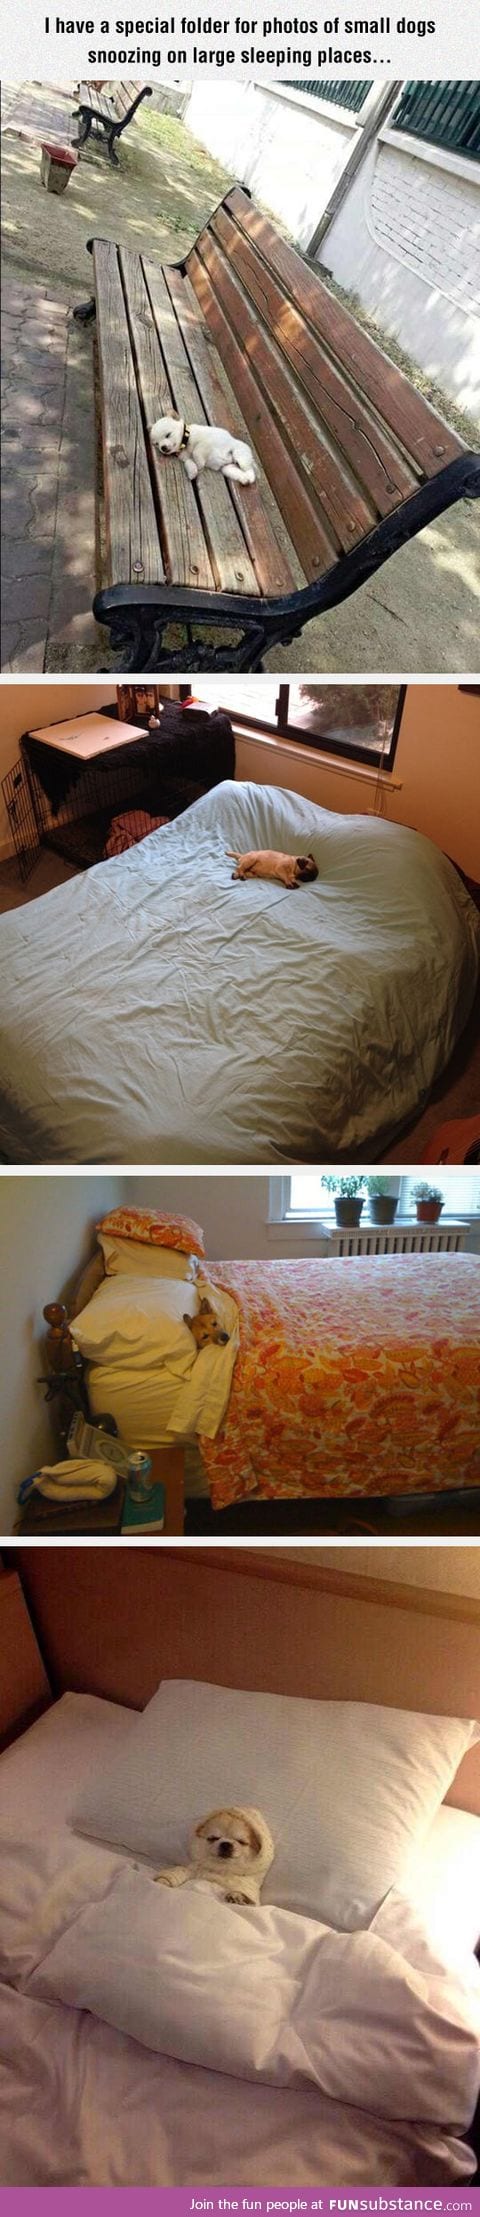 Small dogs snoozing on large sleeping places